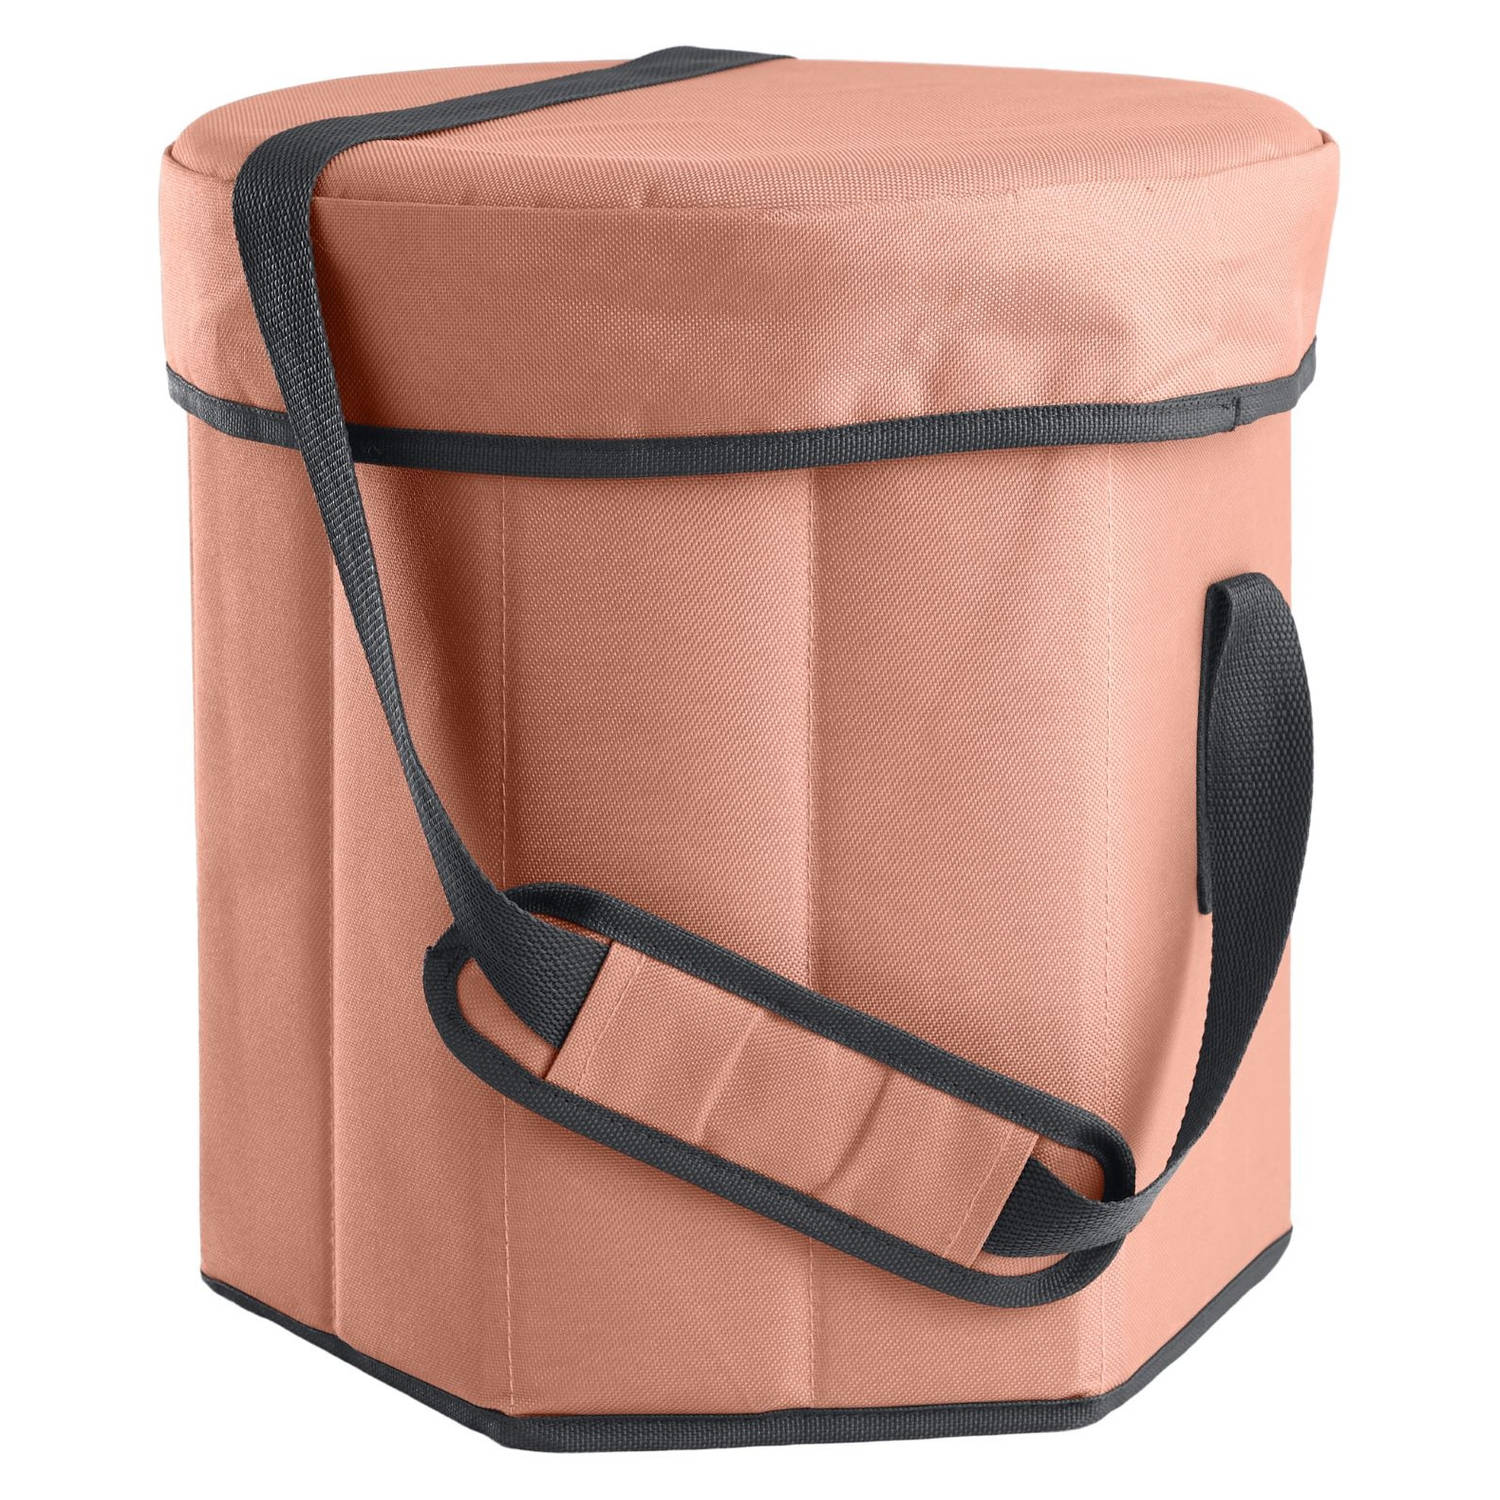 DAY Outfit Koelbox met zitje 20 Liter - Misty Coral